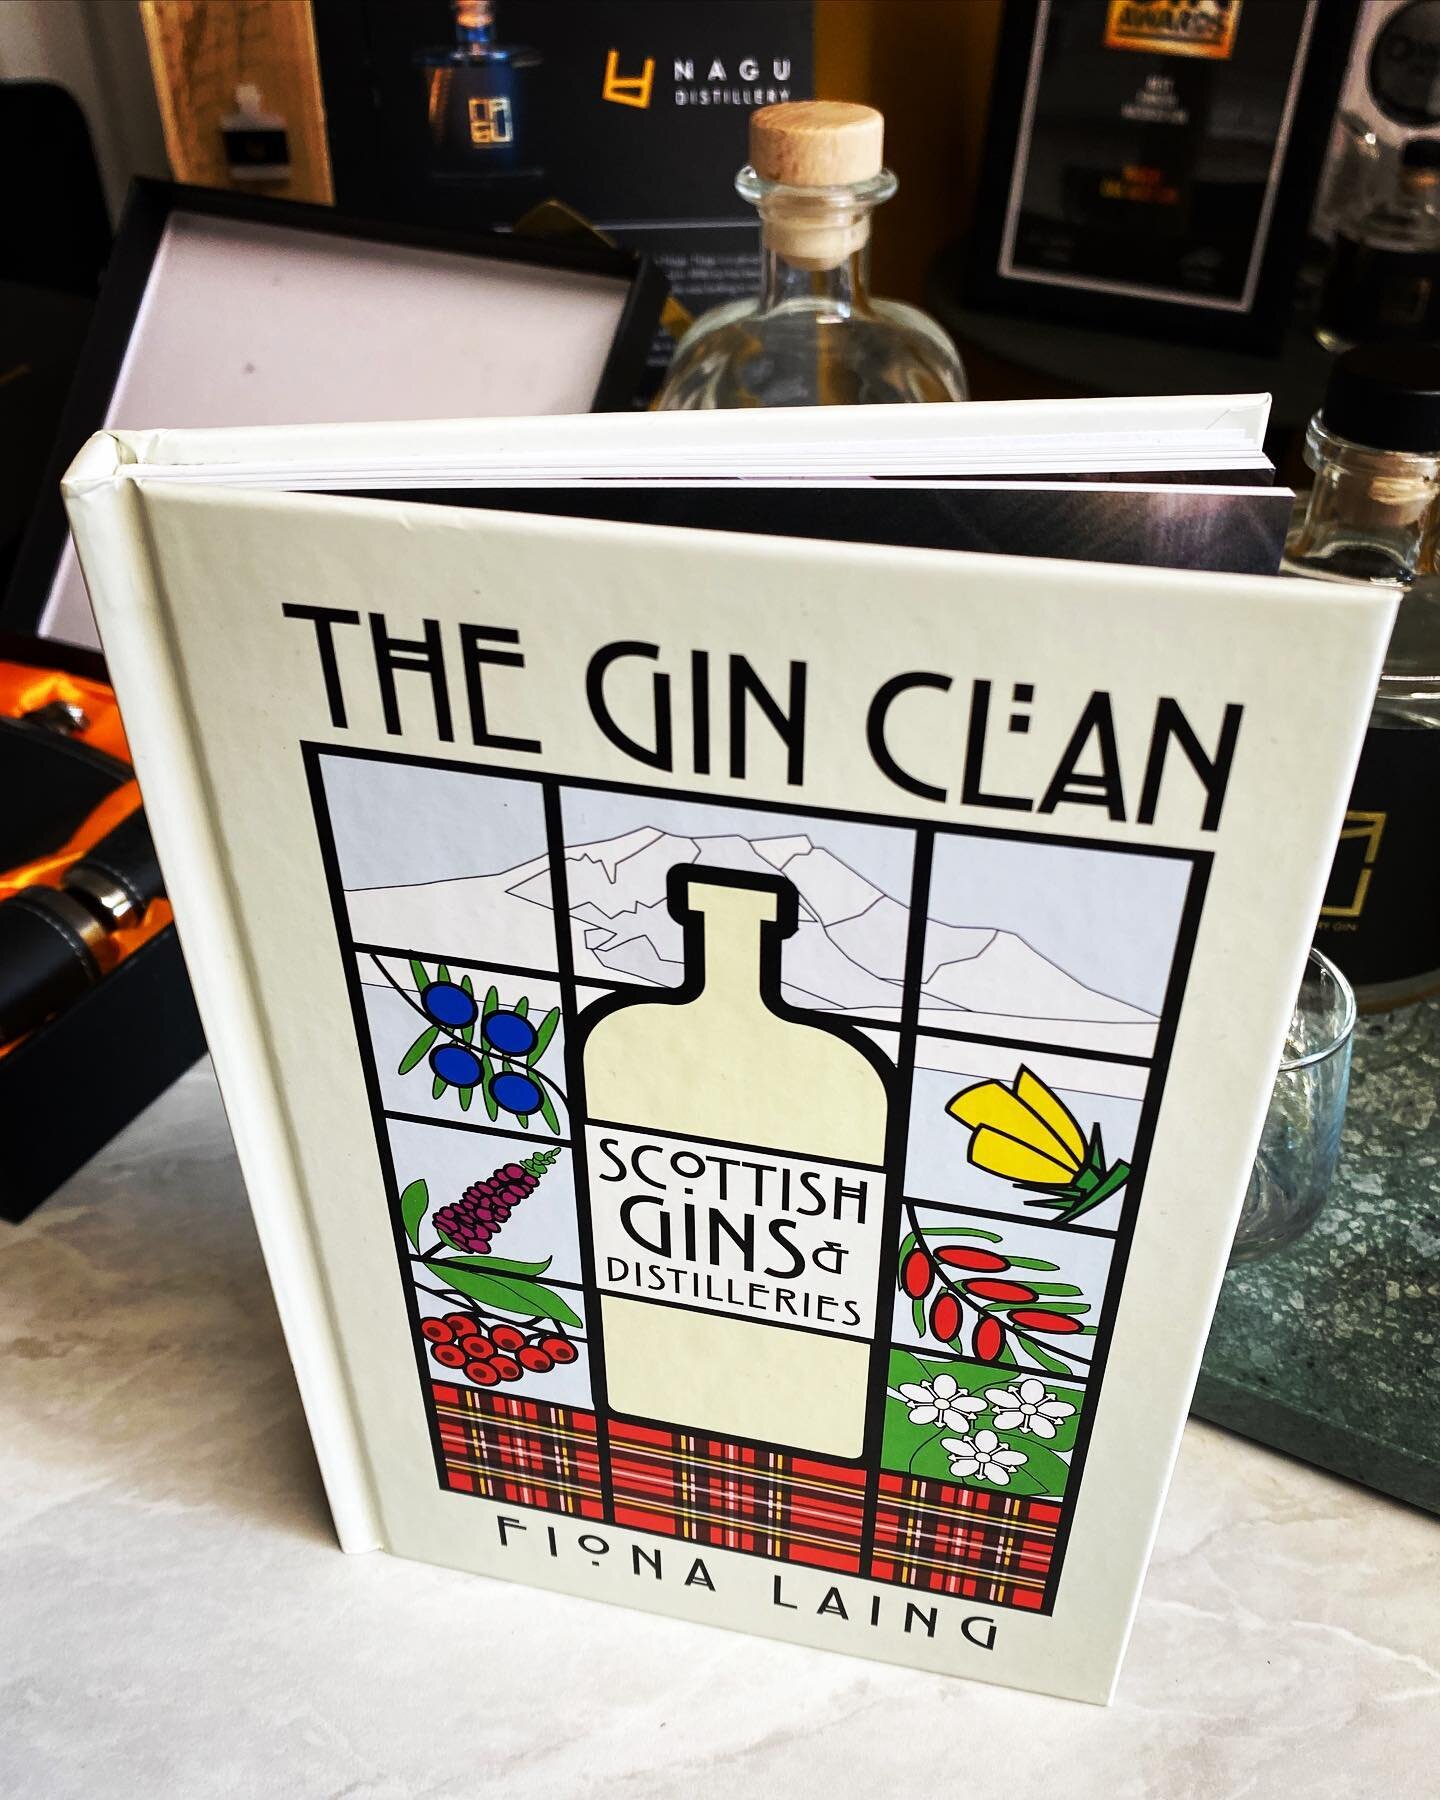 Last week we had a surprising visit by Fiona Laing.
Fiona is an UK journalist / author and has written several books about gin in UK.
It was interesting to share experiences with someone who really knows the industry.
At the end we were very privileg